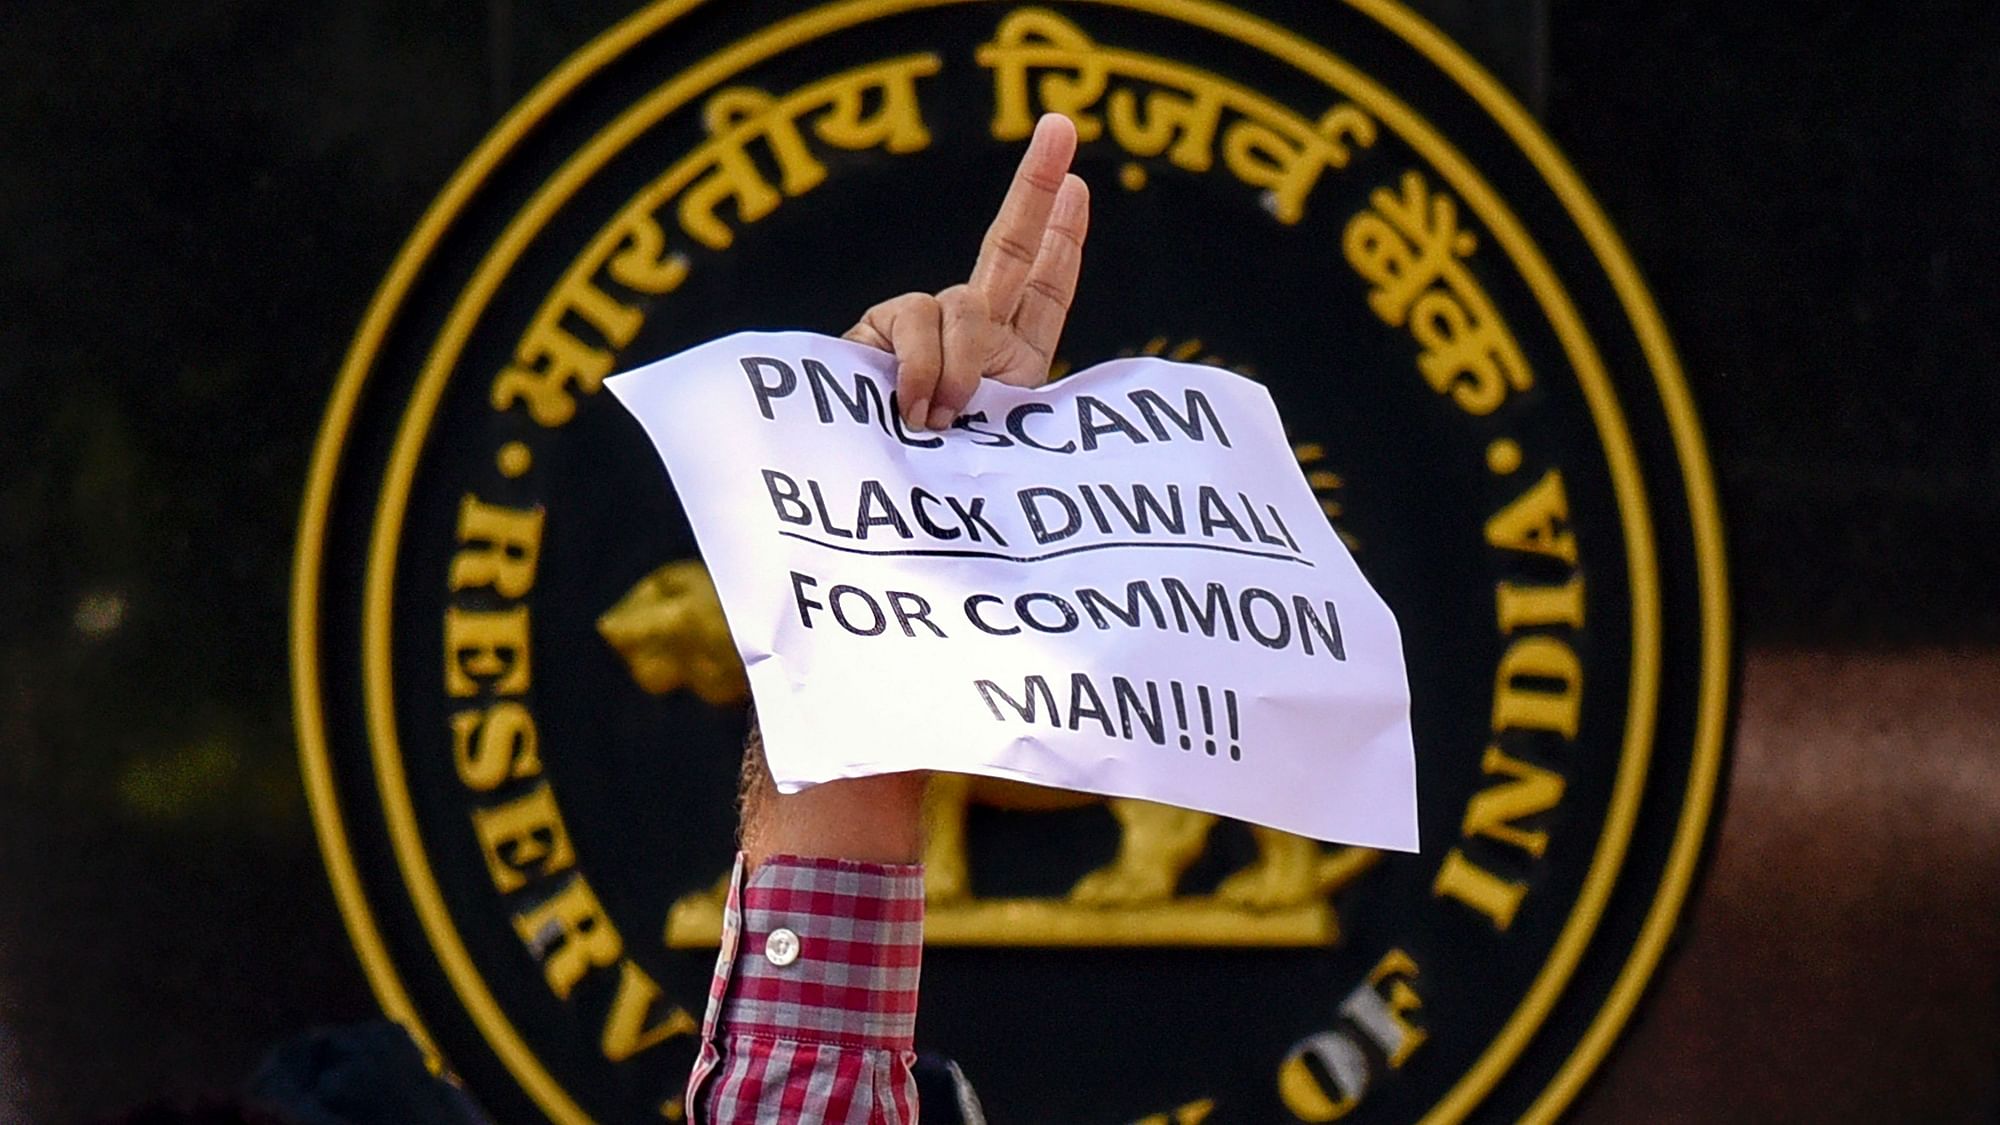  A depositor of Punjab and Maharashtra Cooperative (PMC) bank displays a placard during a protest over the banks crisis, outside the Reserve Bank of India building, in Mumbai. Image used for representation.